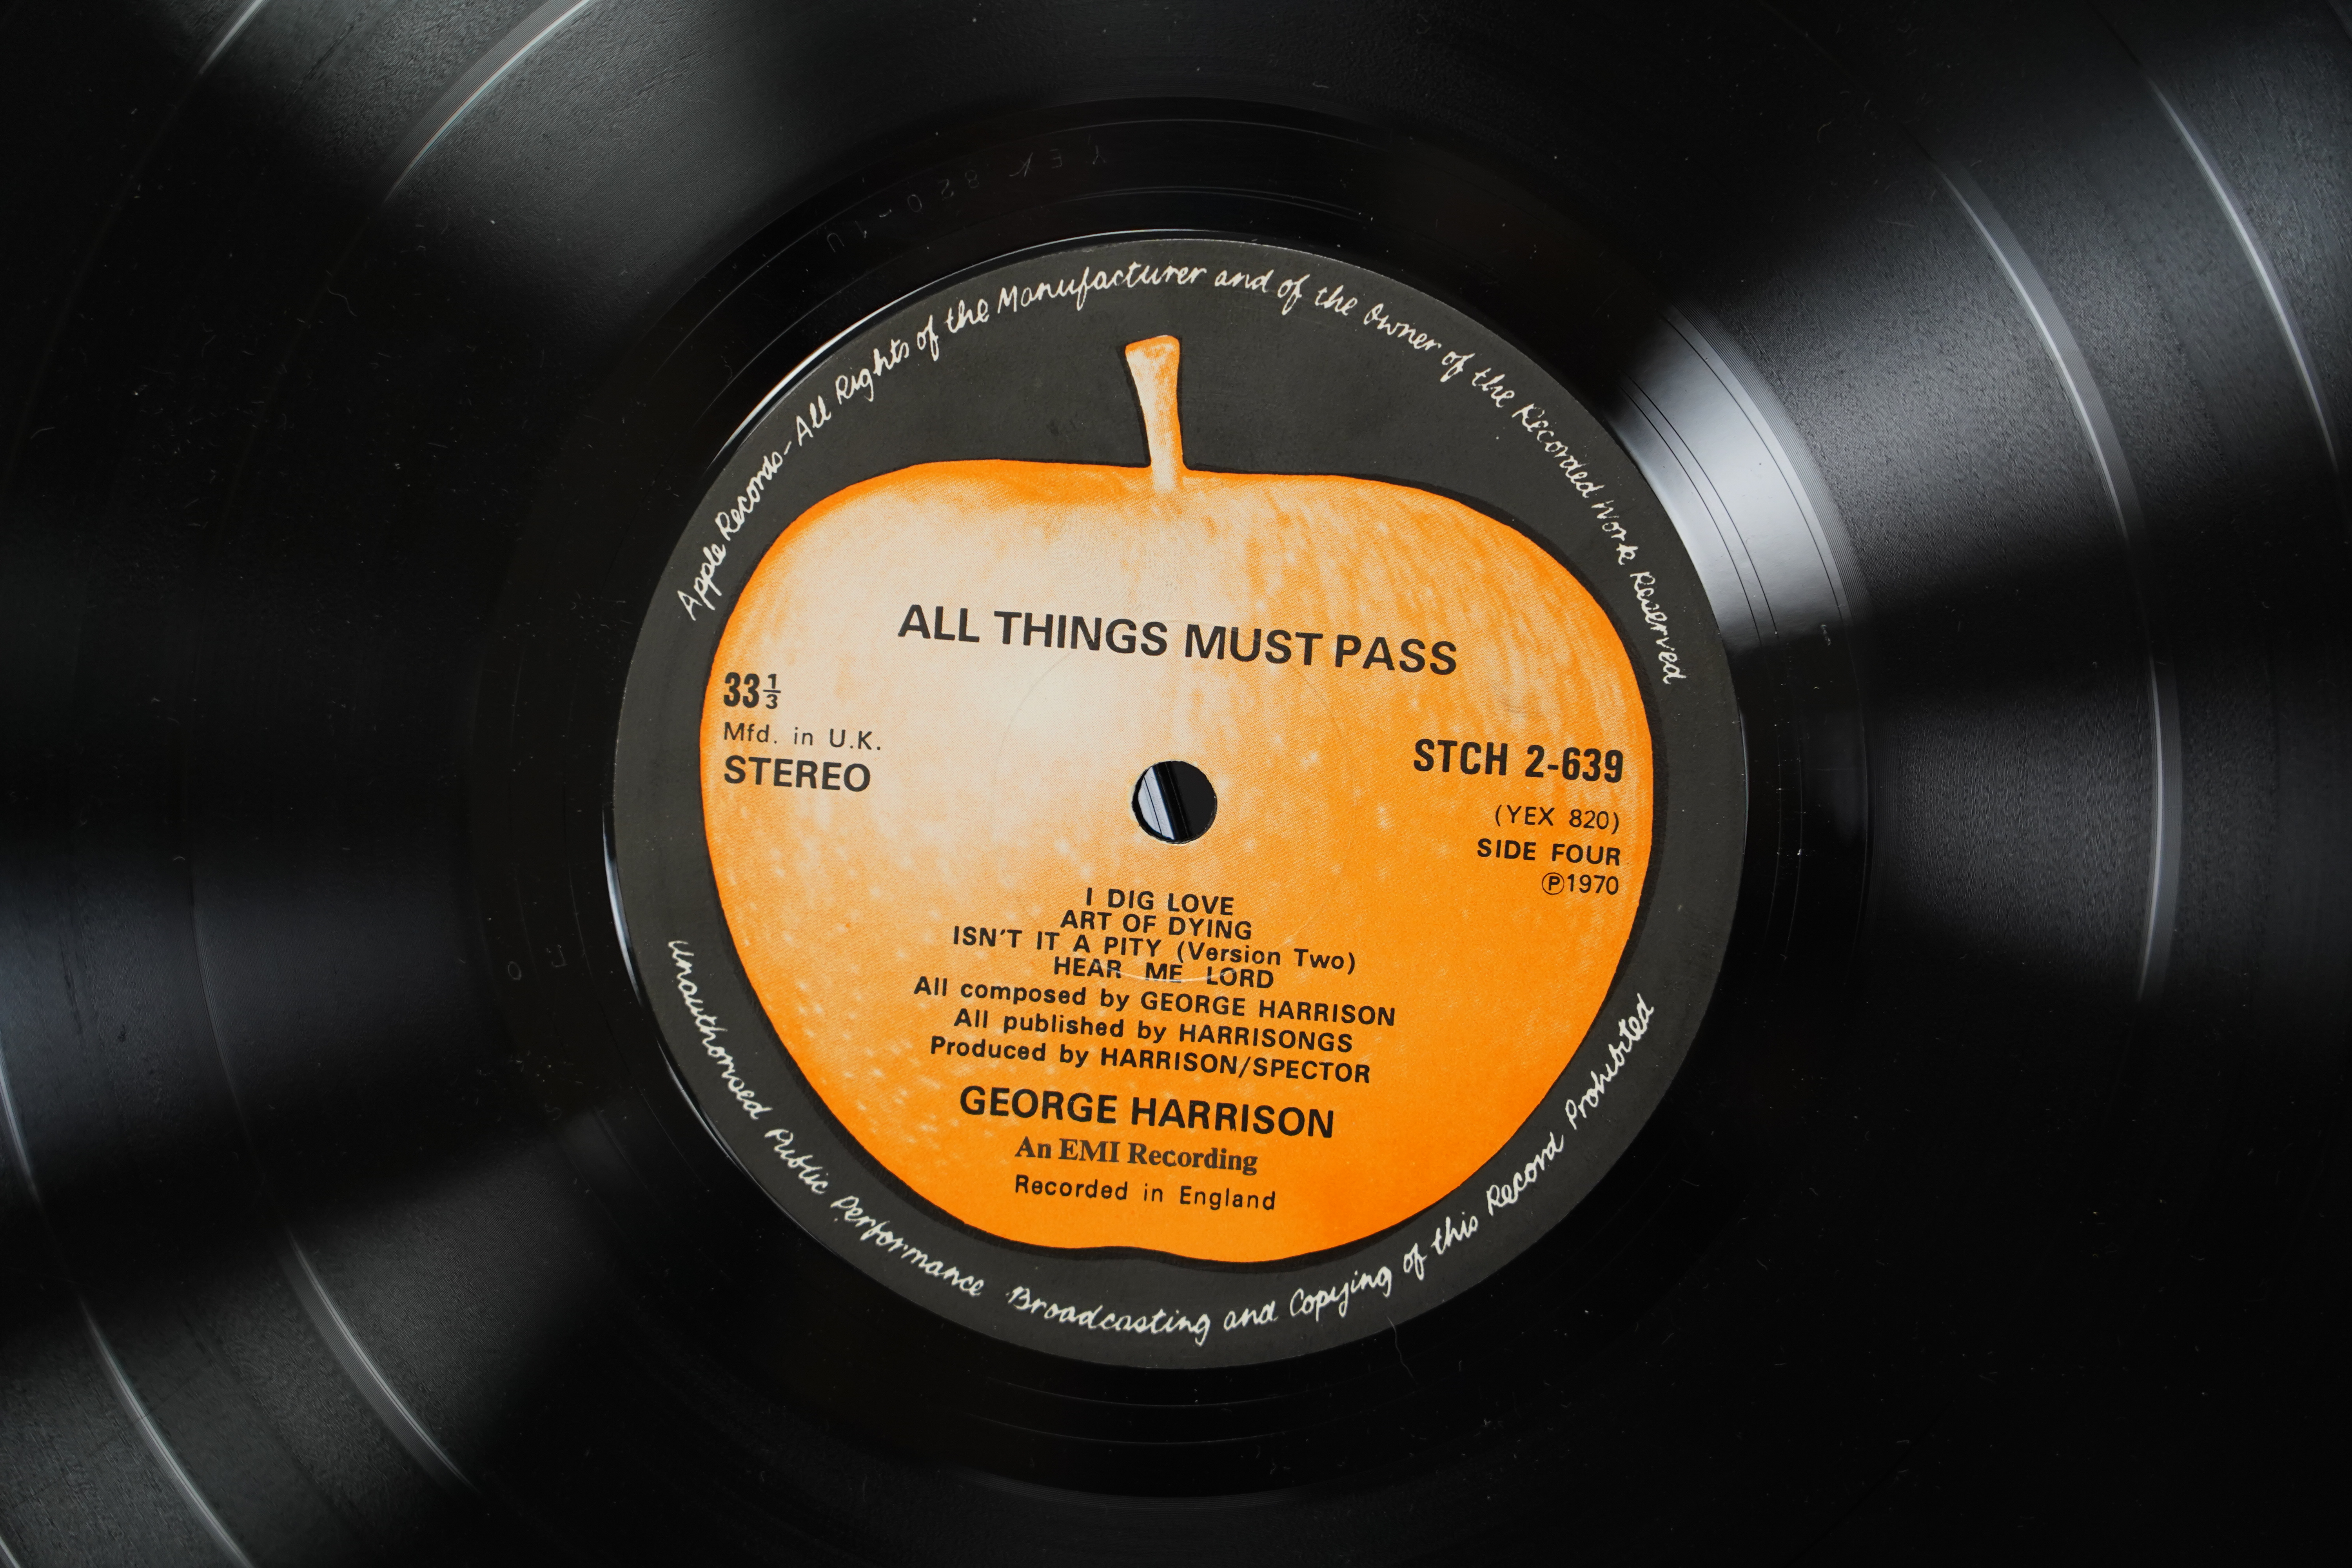 George Harrison, All Things Must Pass 3-LP box set (missing poster), STH 1-639. Condition - fair